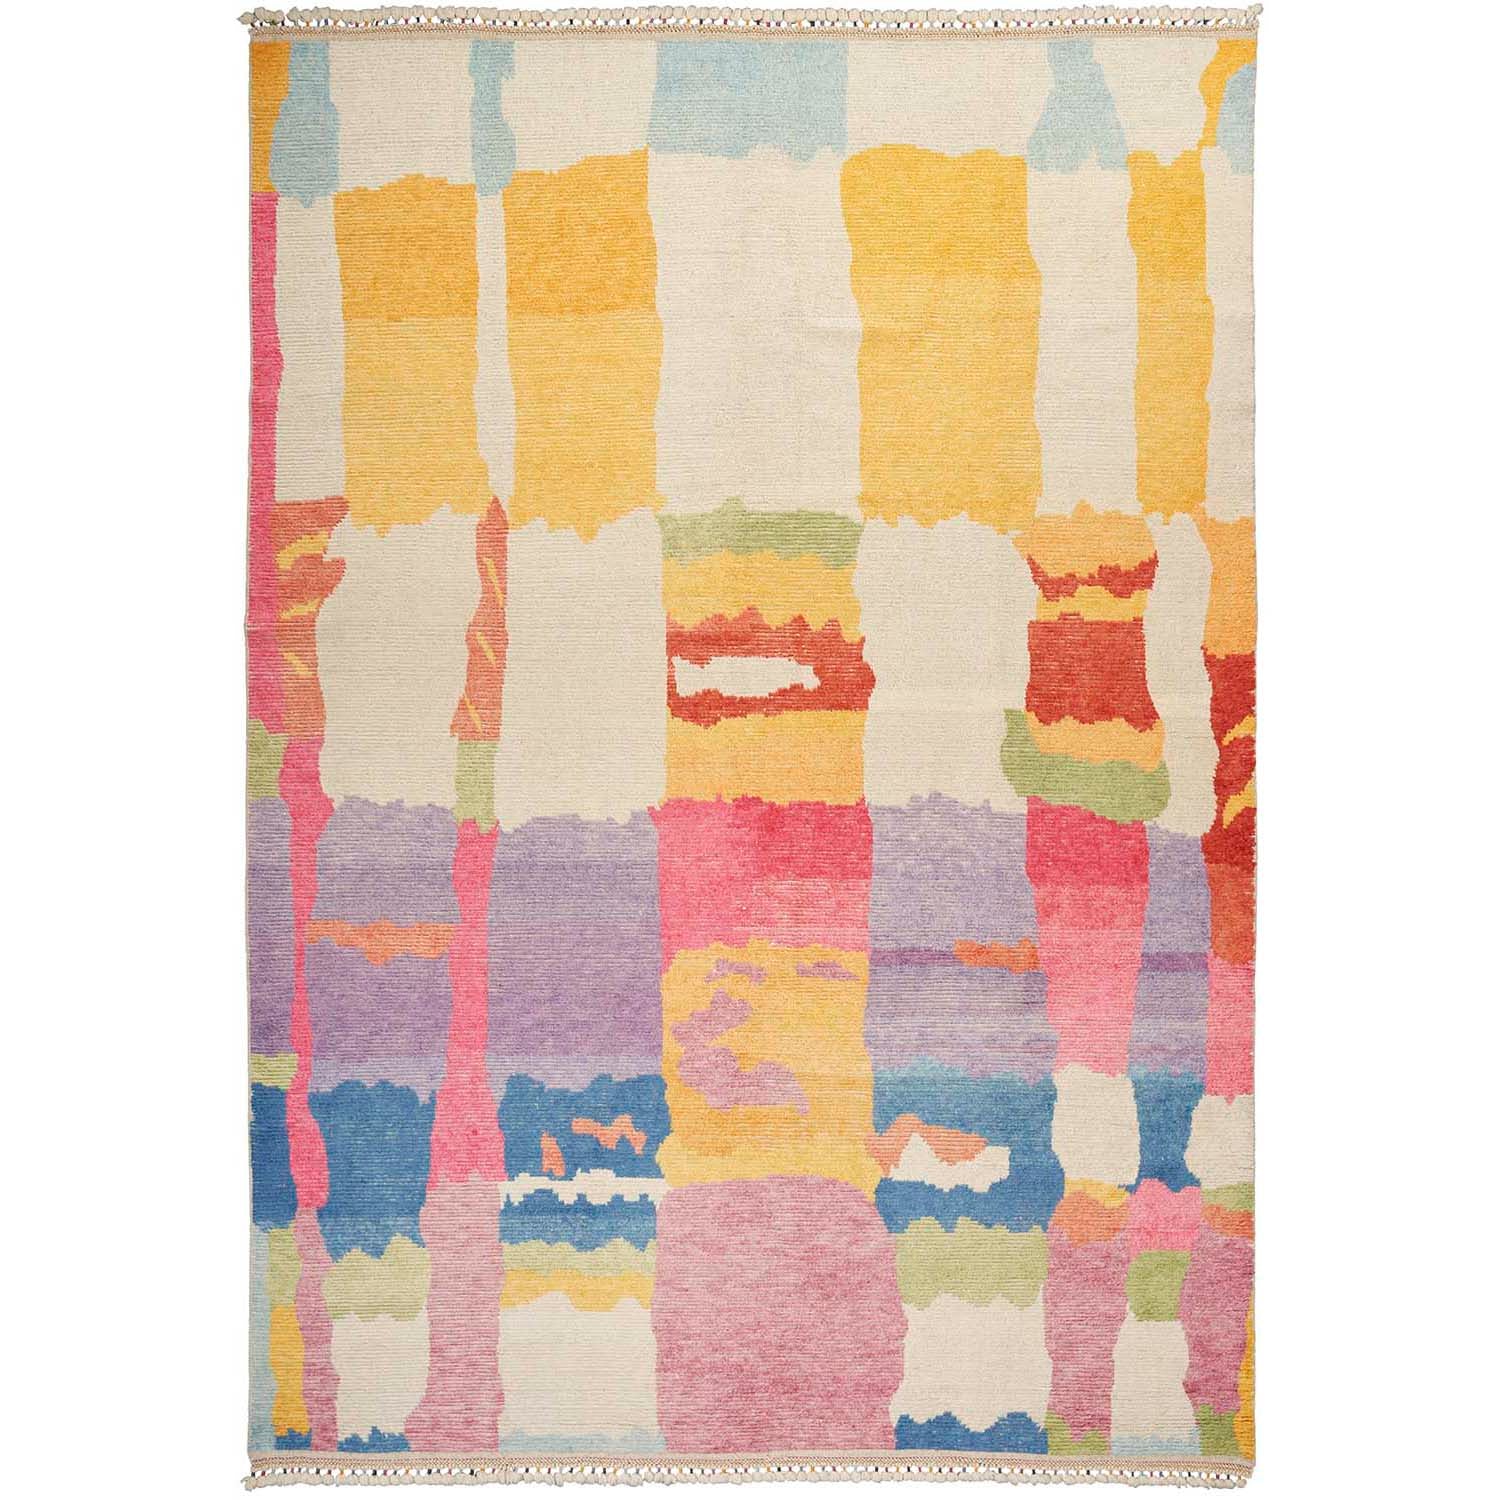 Colorful, abstract rug with soft pastel shades and blurred effect.